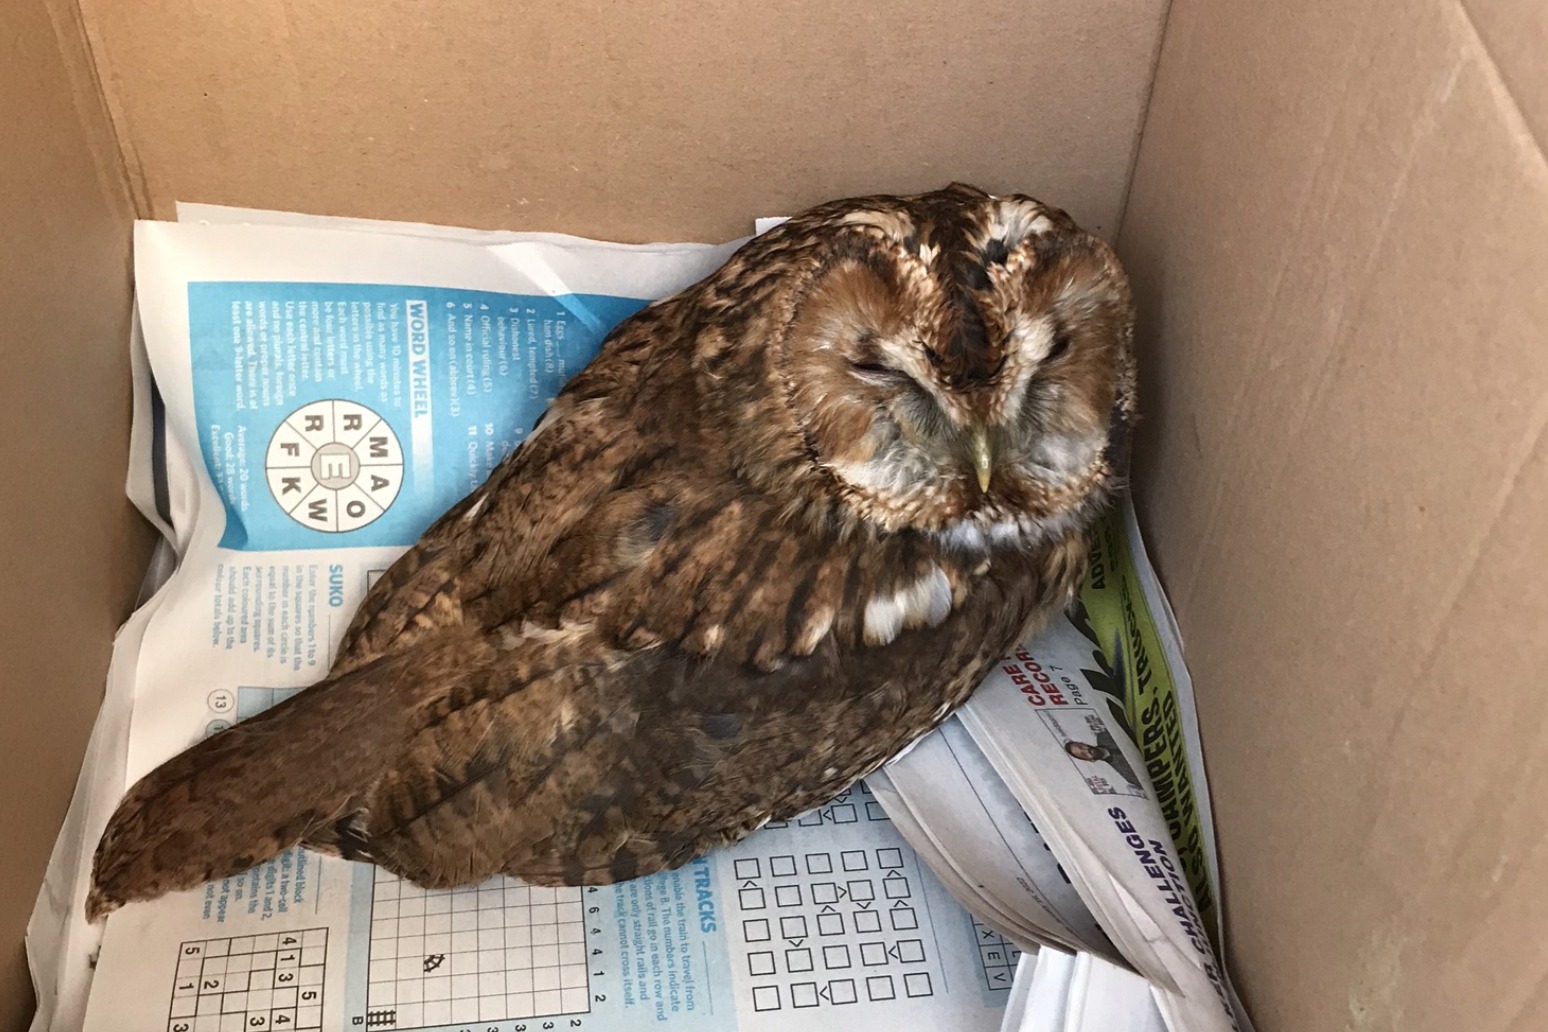 Tawny owl ‘will live to fly another night’ after encounter with pond netting 